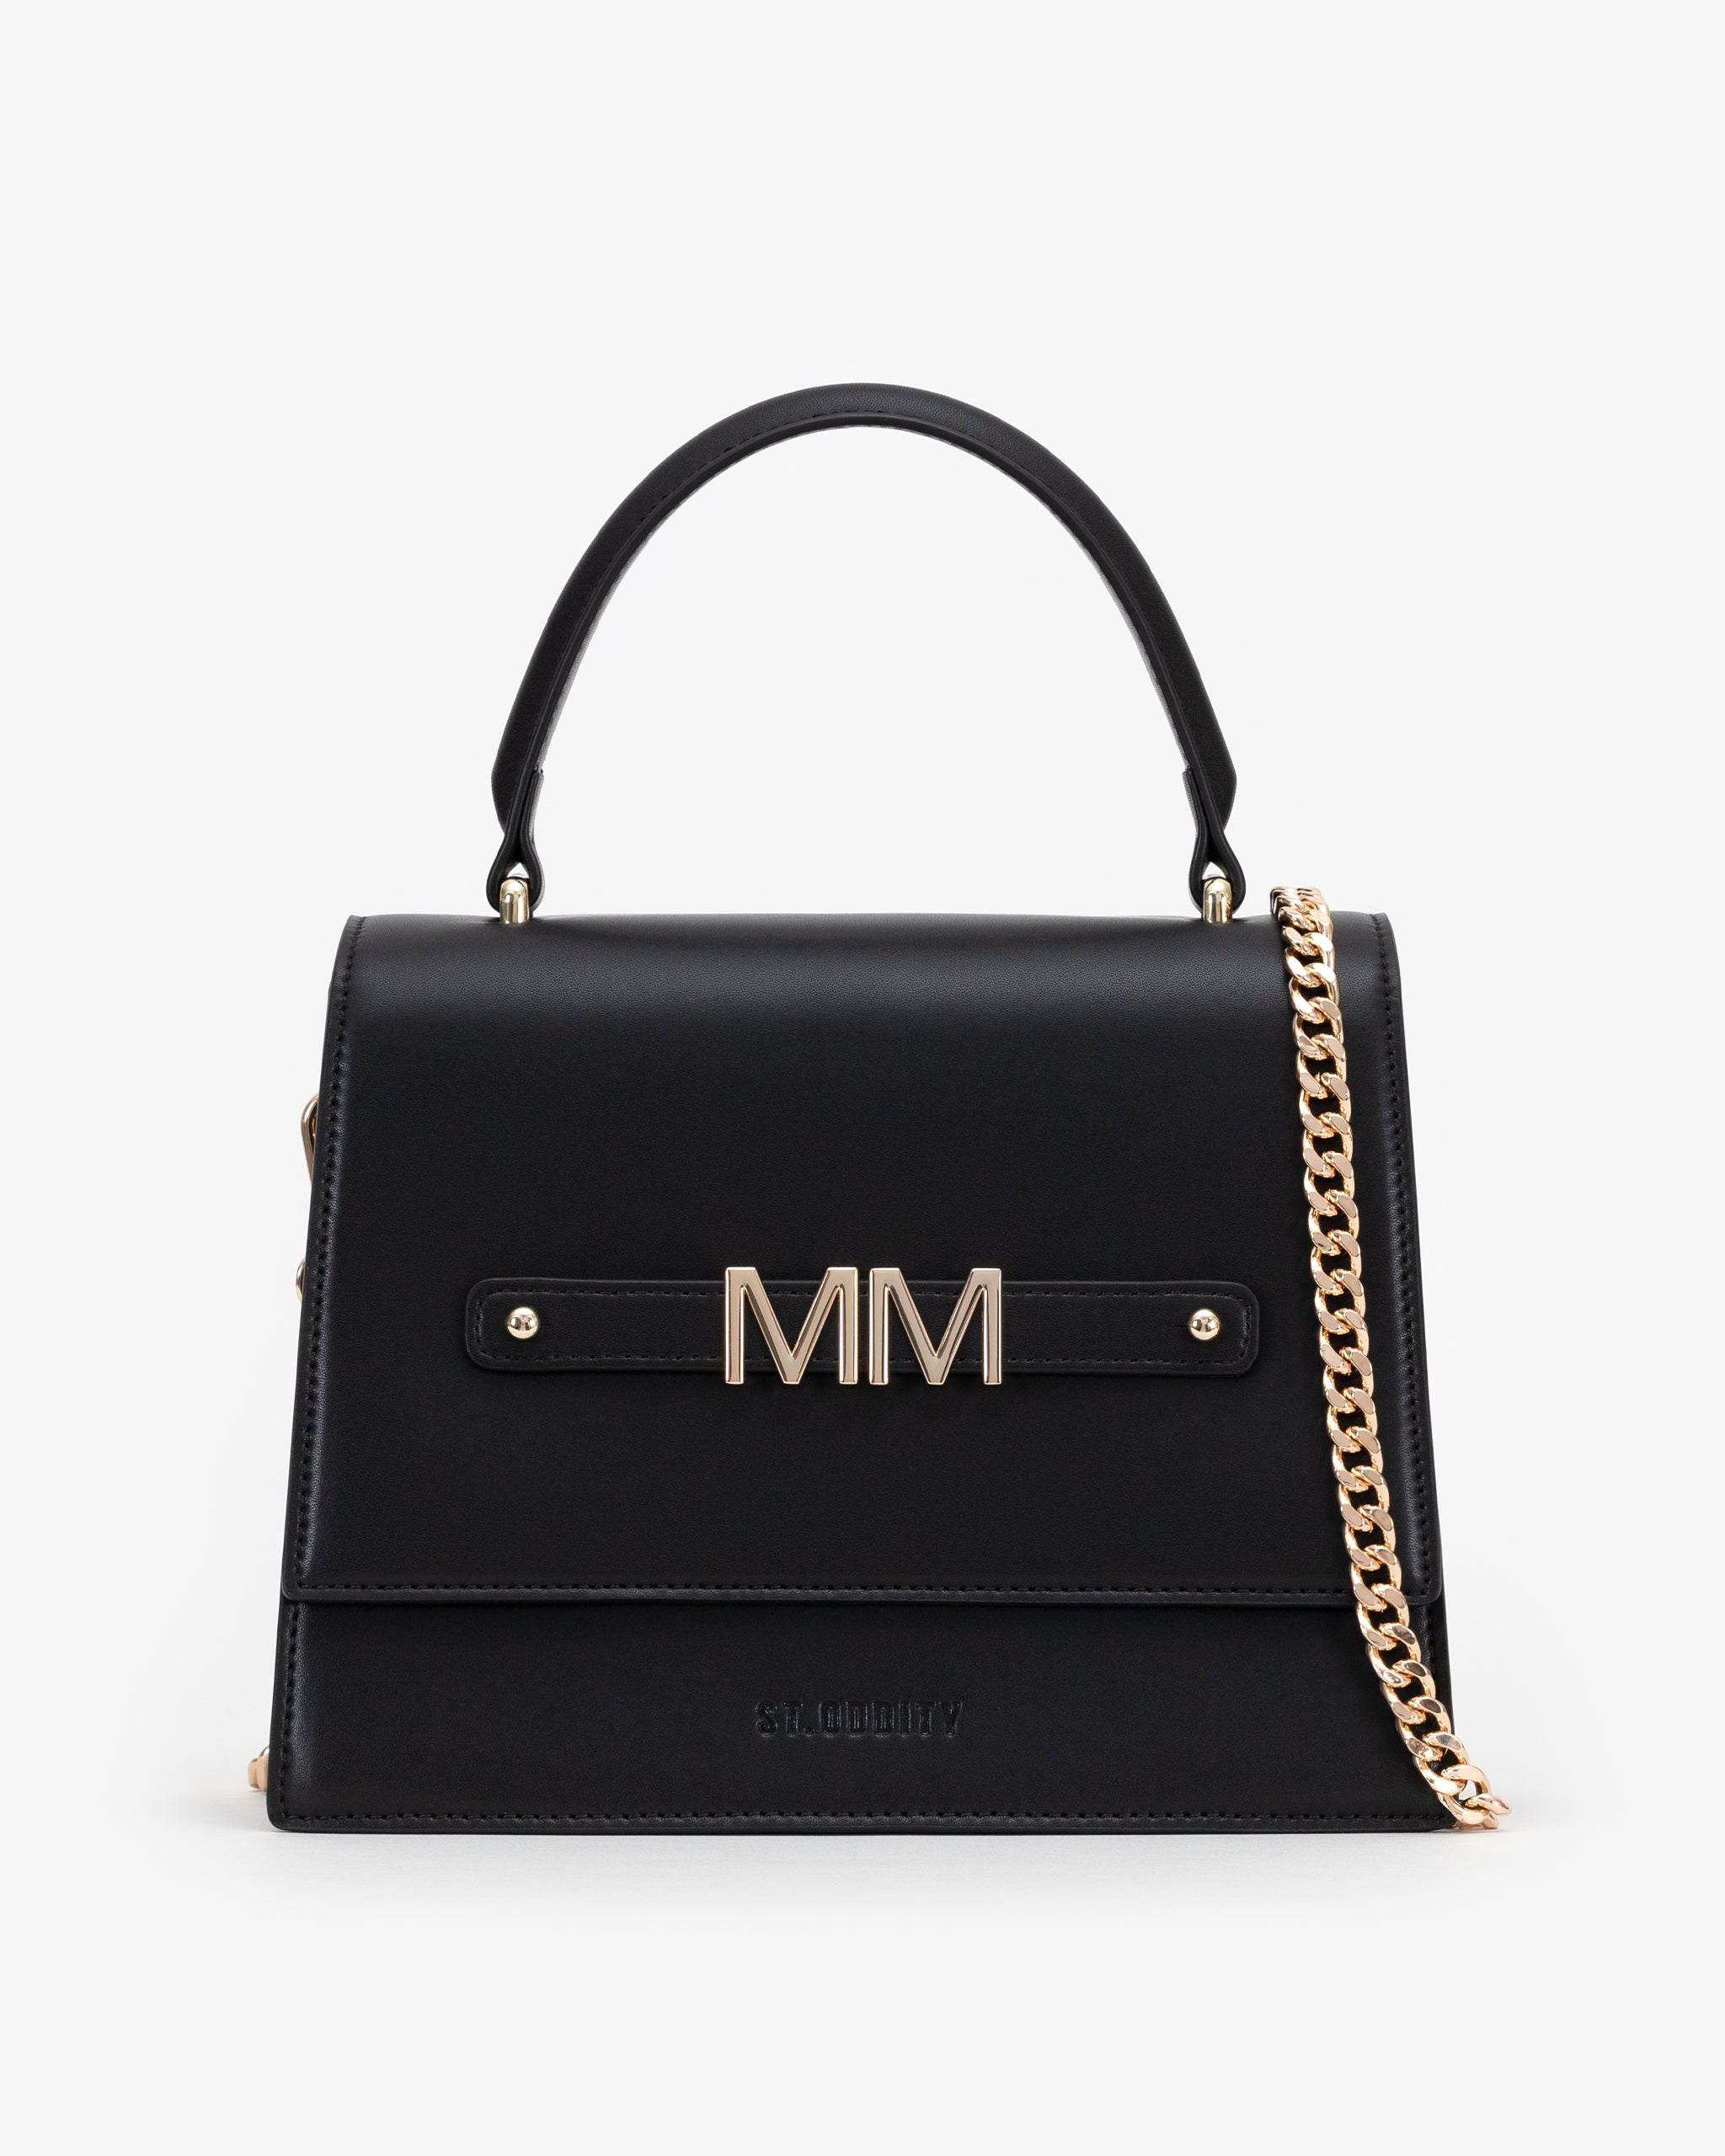 Pre-order (Mid-May): Large Evening Bag in Black/Gold with Personalised Hardware